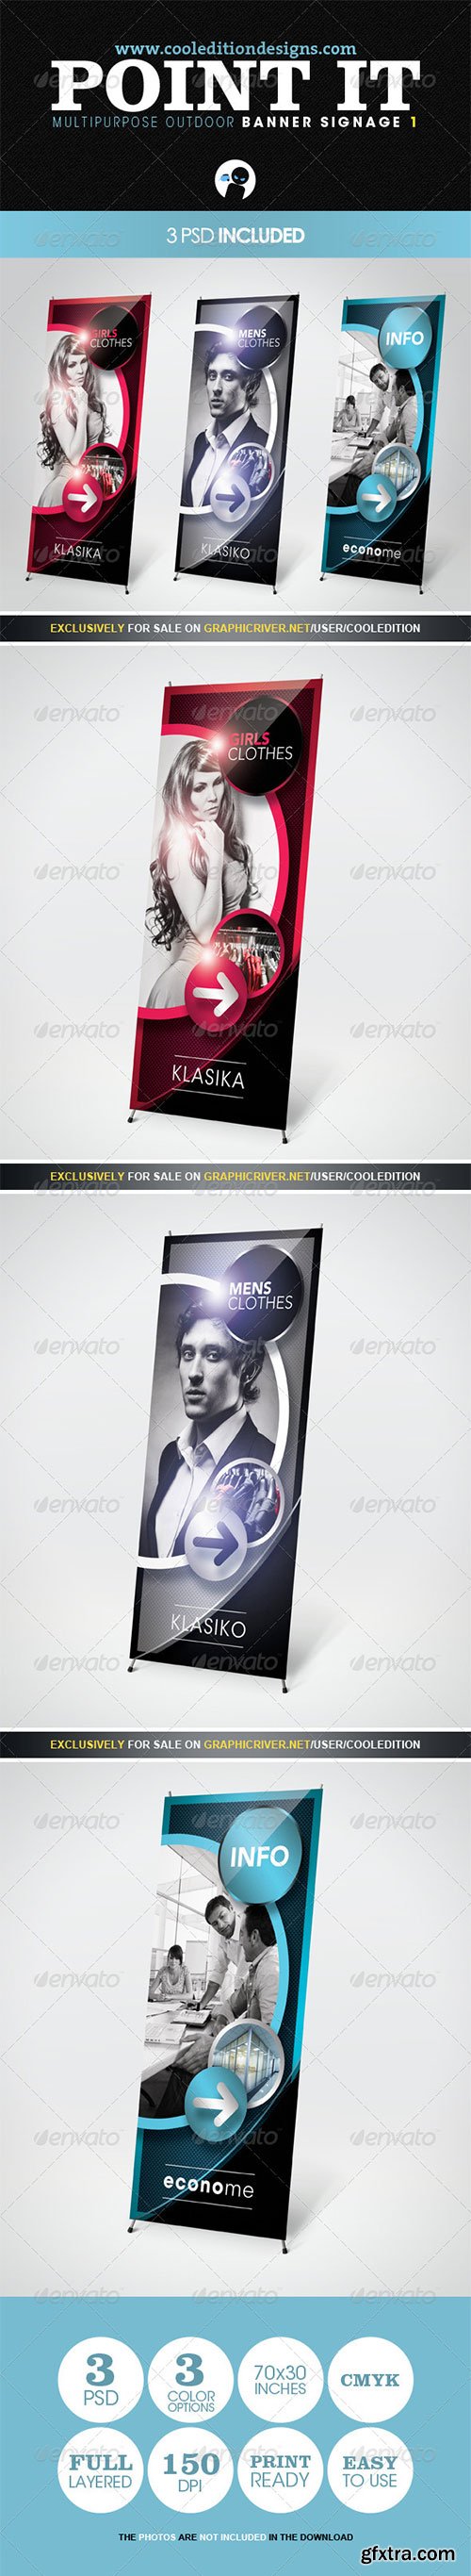 GraphicRiver - Point It - Multipurpose Outdoor Banner Signage 1